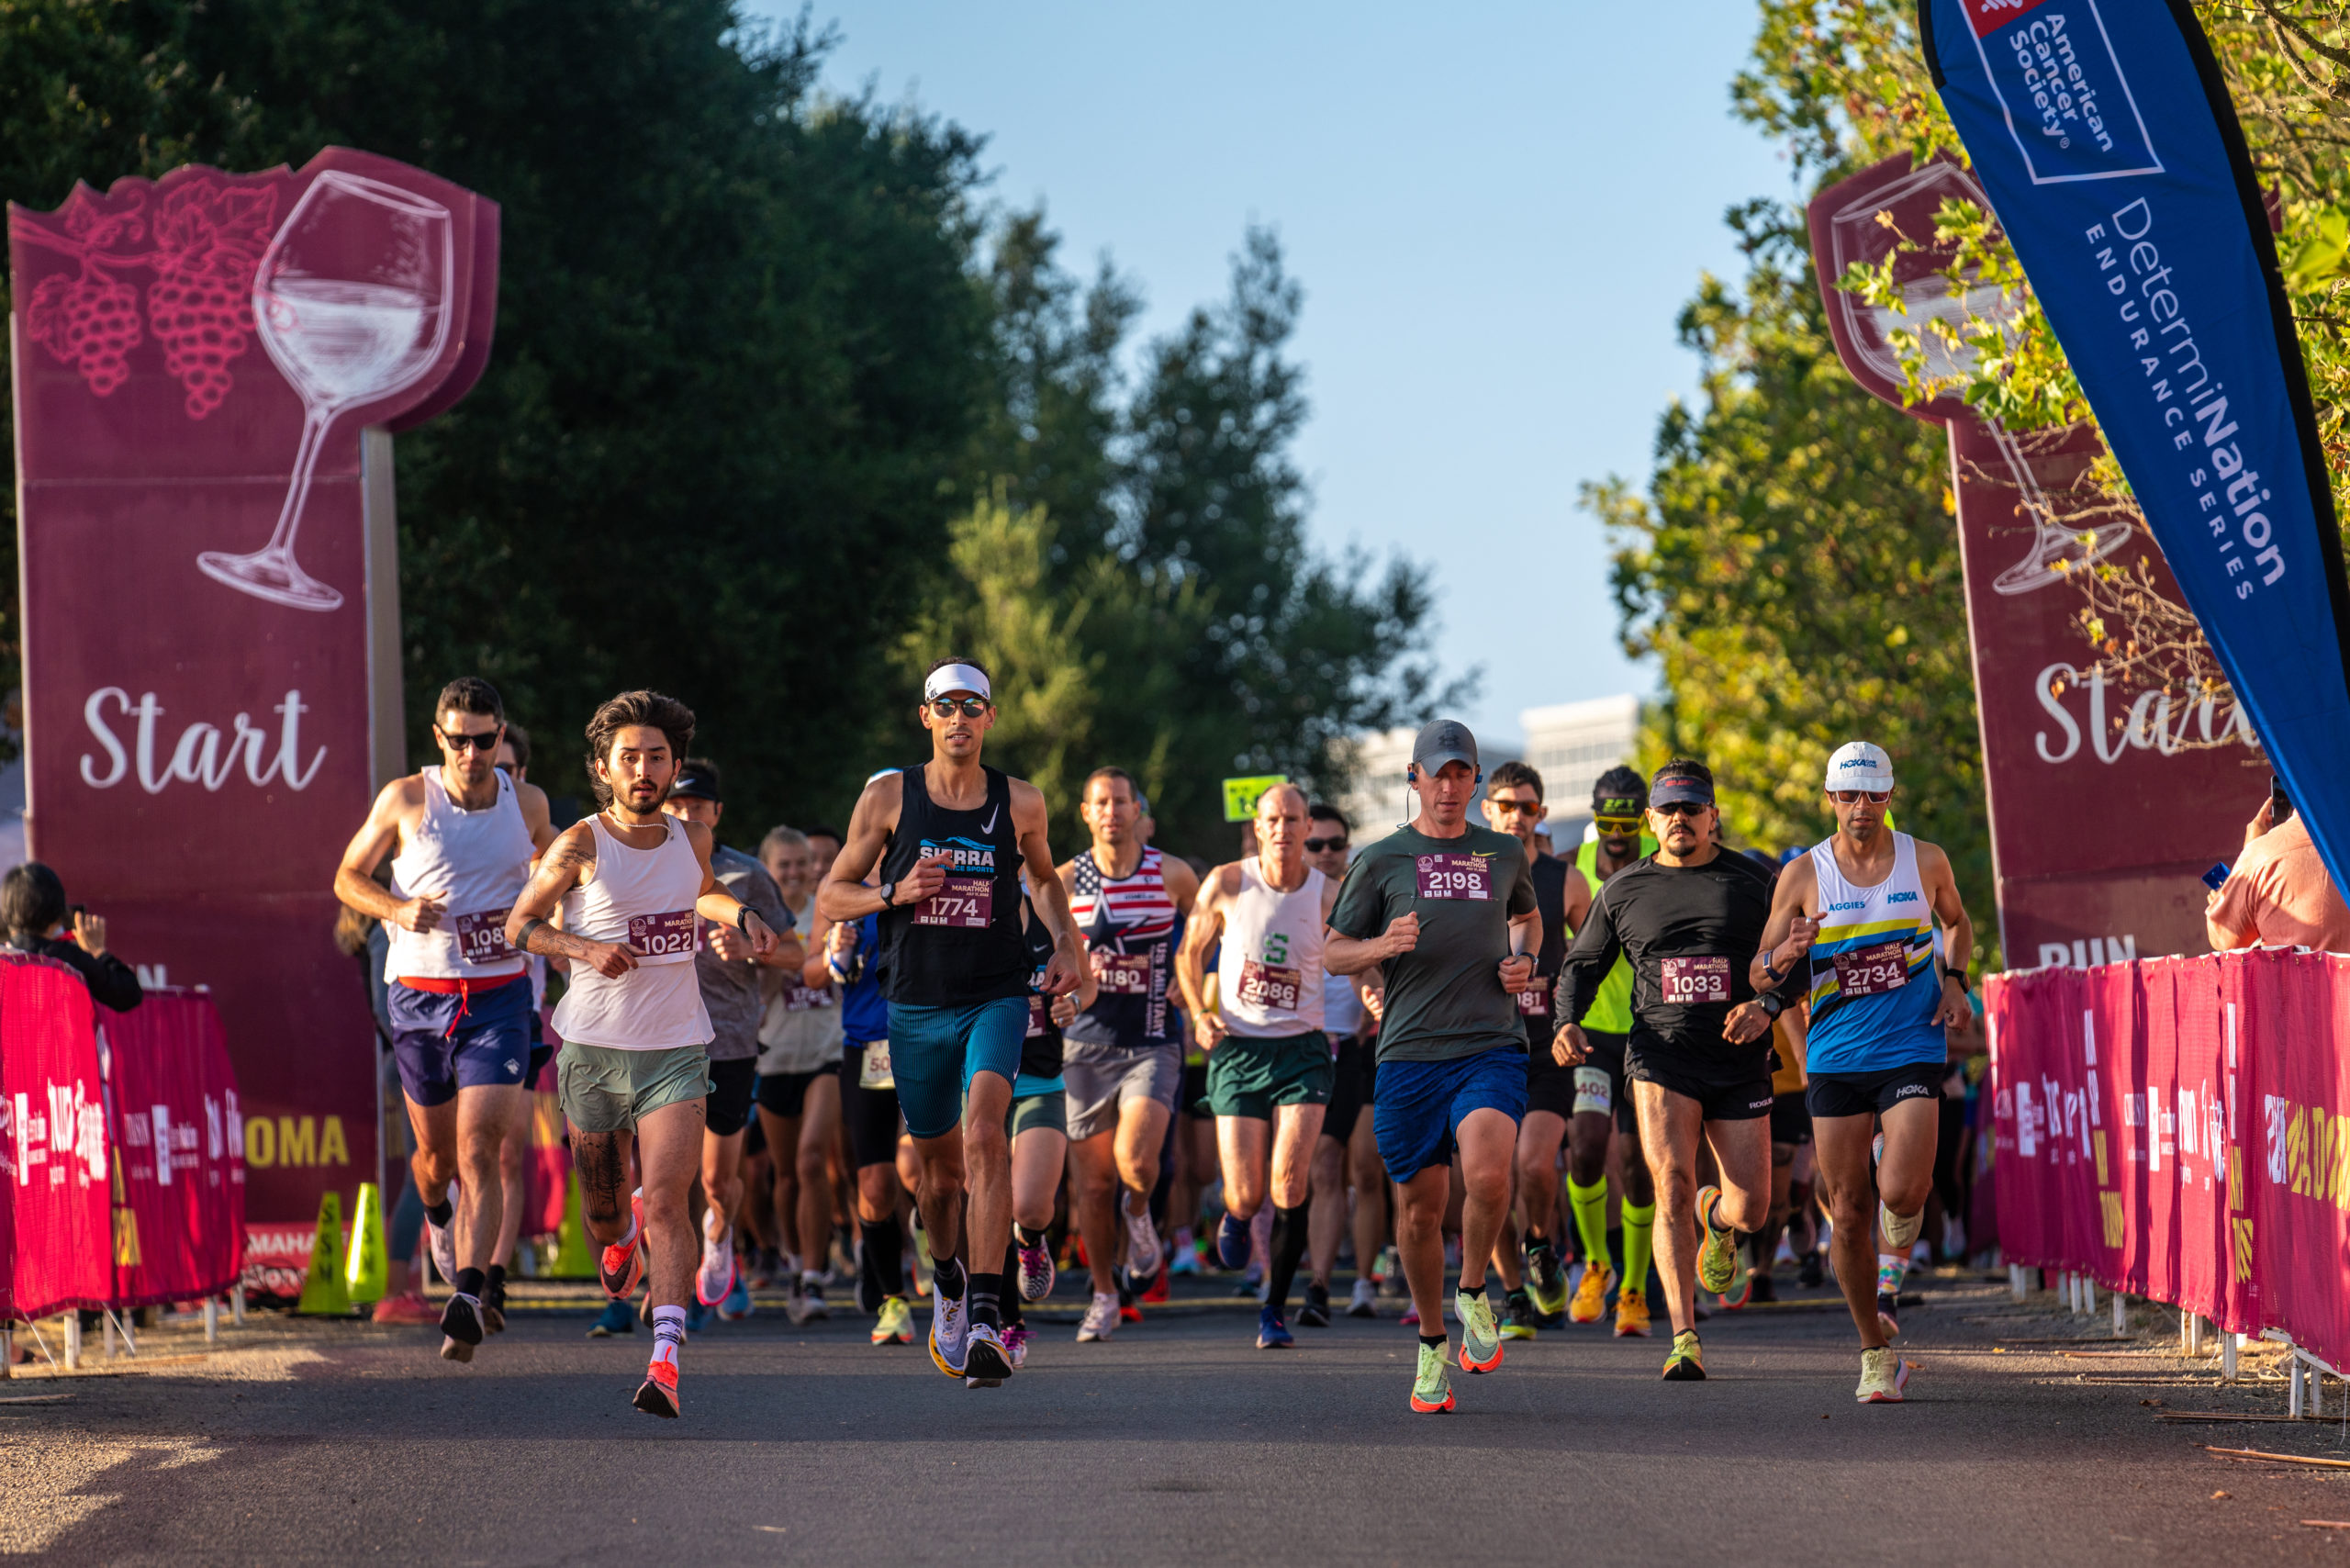 Wine Country 4,000 runners for 18th running of Napa to Sonoma